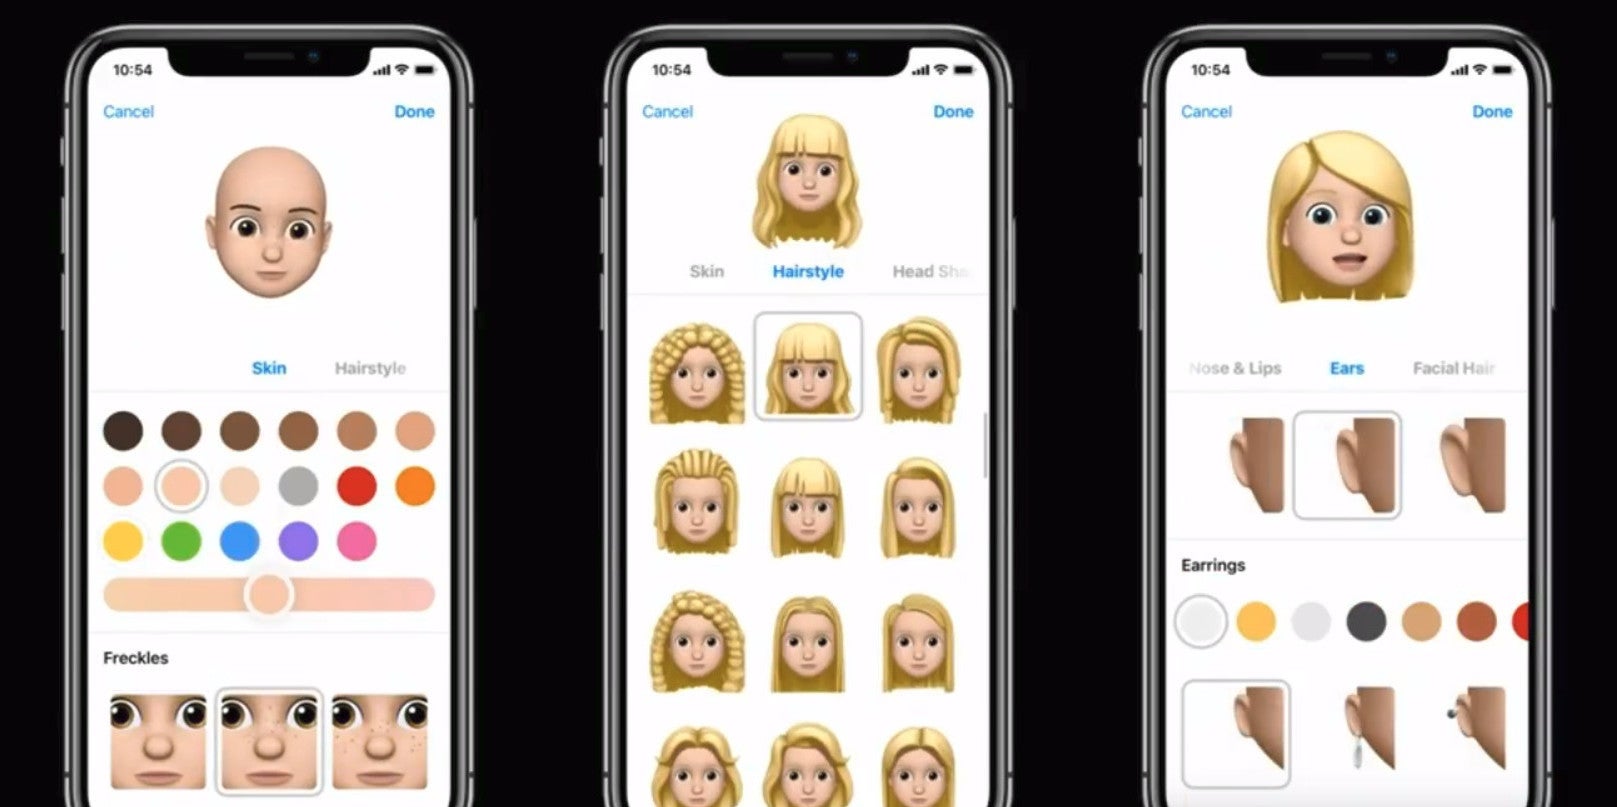 Customizing a Memoji - iOS 12 is announced with focus on performance and augmented reality